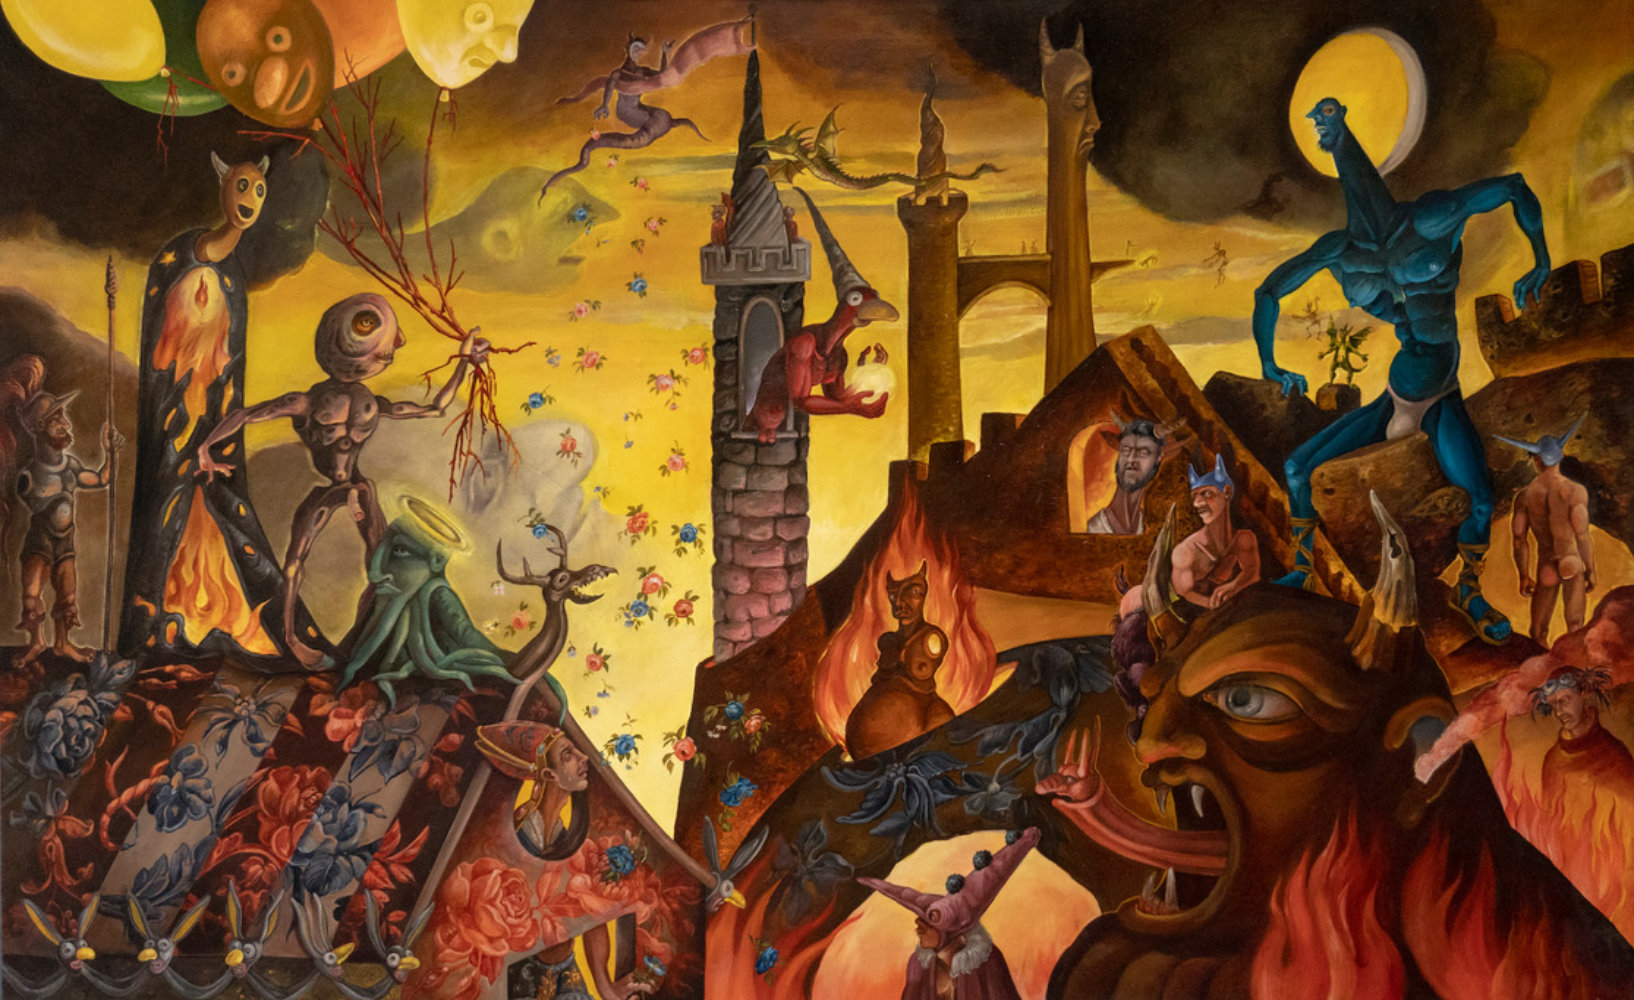 A painting in which multiple figures and demon-like figures look at one another in a surreal scene with medeival and biblical icons. The background is a dark yellow sky, the foreground is populated with the variety of figures engaged in various activities, like a small town full of corporeal evil.